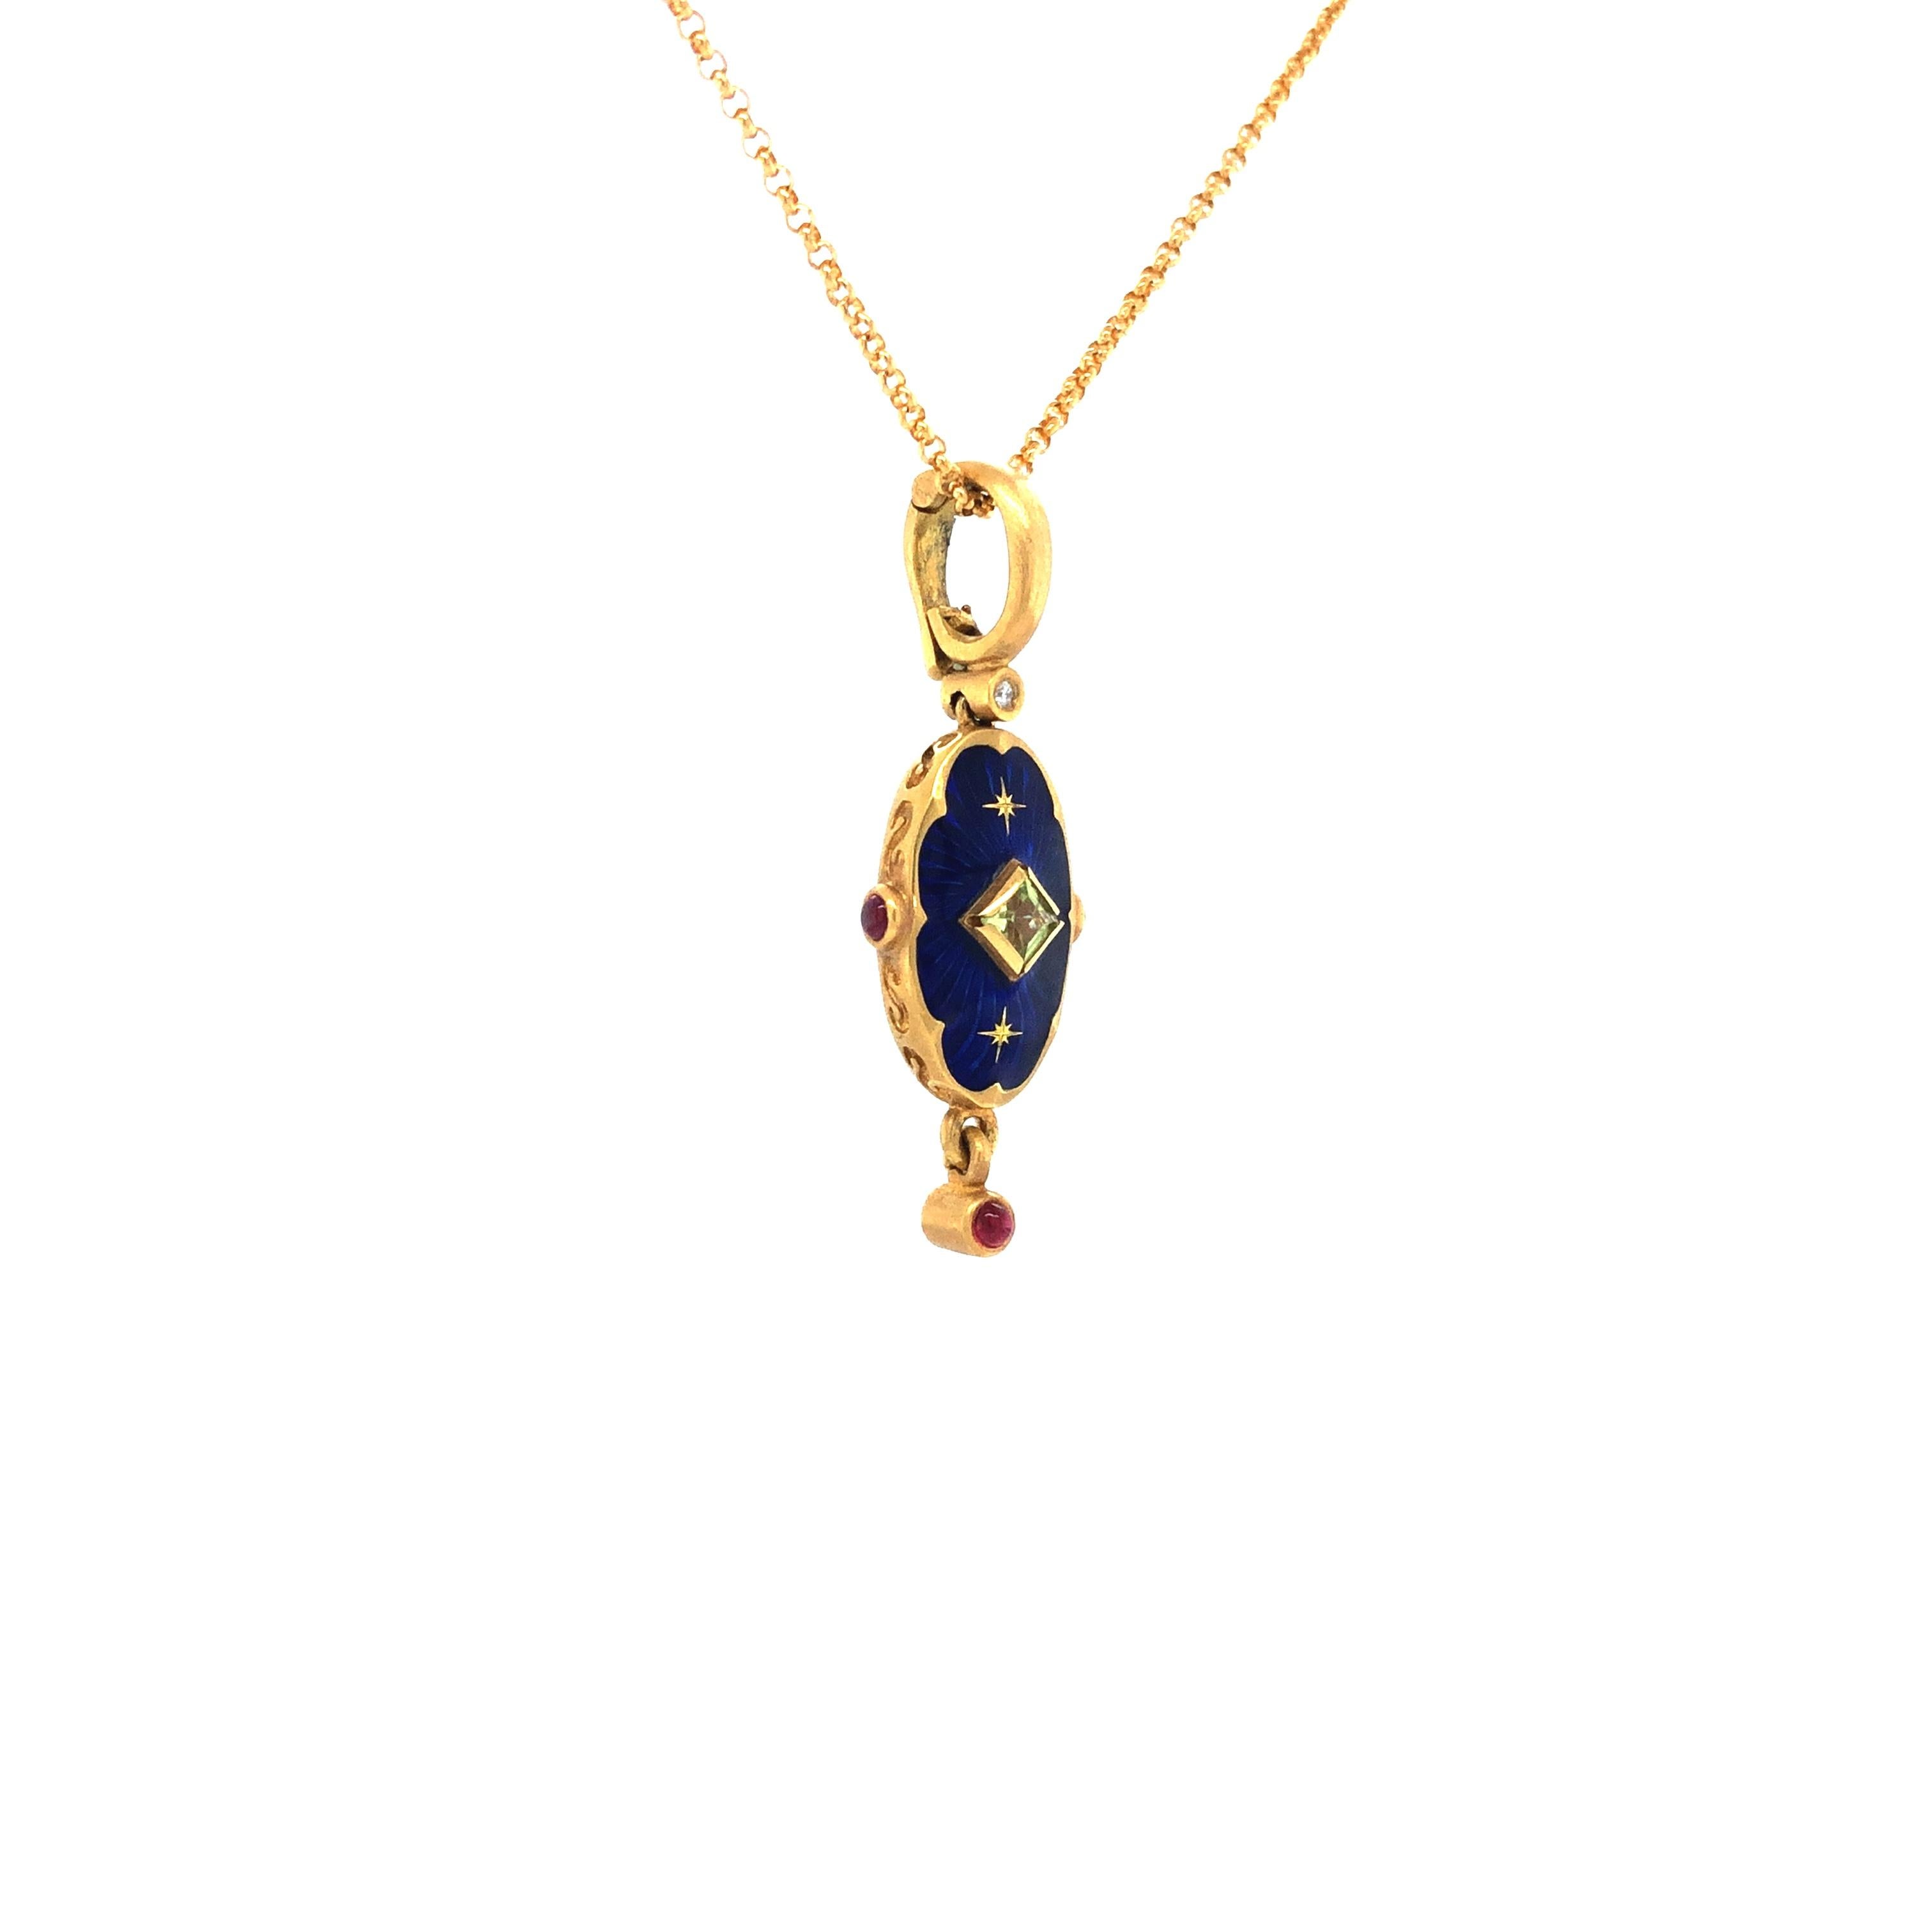 Oval Pendant Necklace - 18k Yellow Gold - Blue Enamel 1 Peridot 3 Rubies 2 Stars In New Condition For Sale In Pforzheim, DE